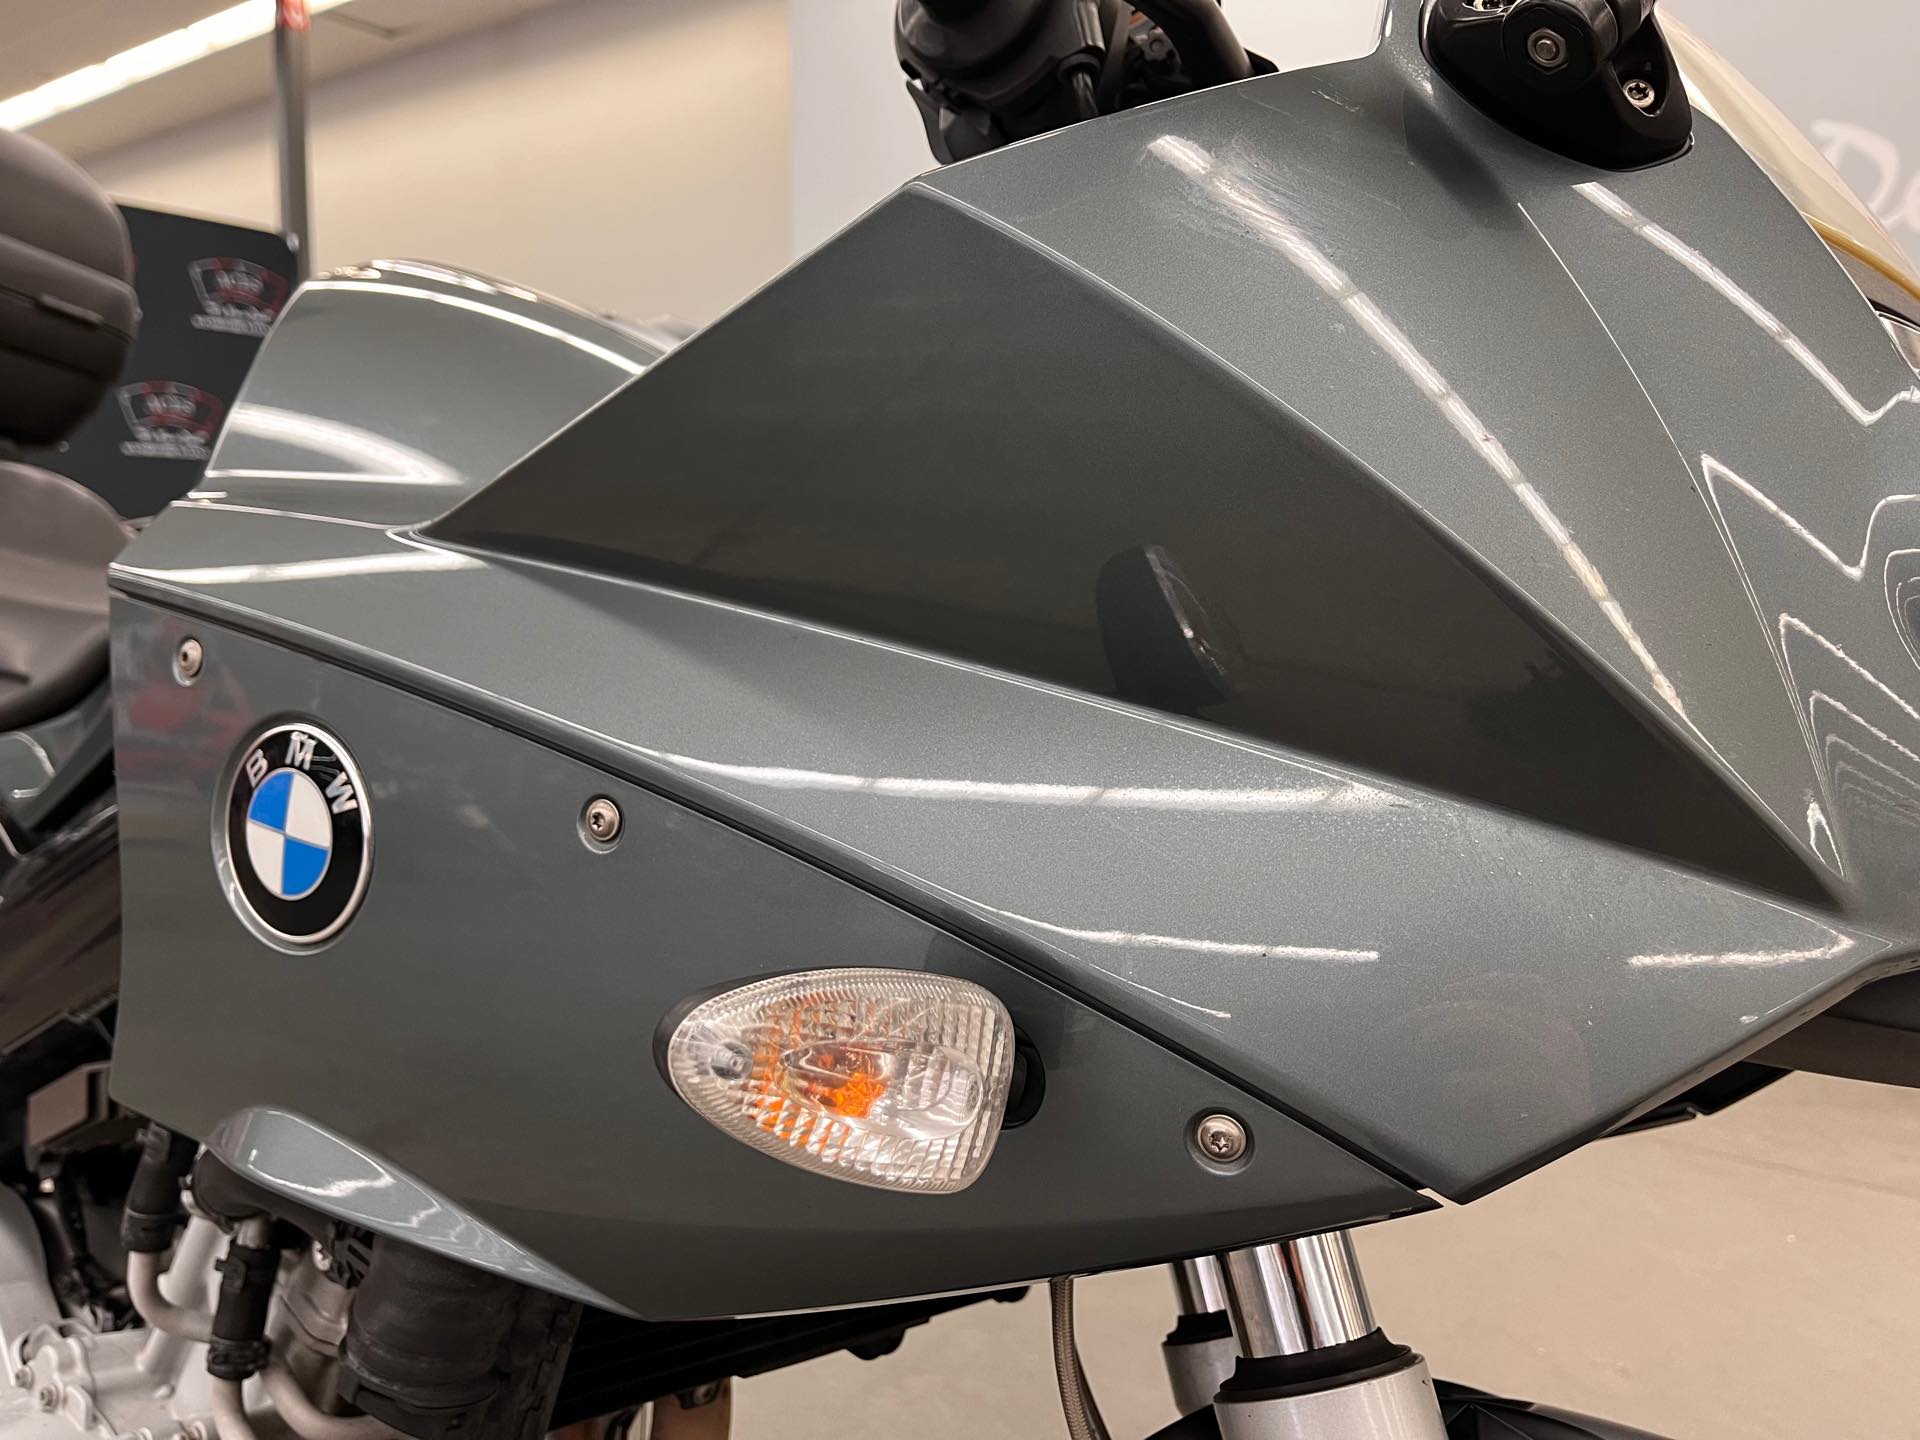 2007 BMW F 800 S at Aces Motorcycles - Denver